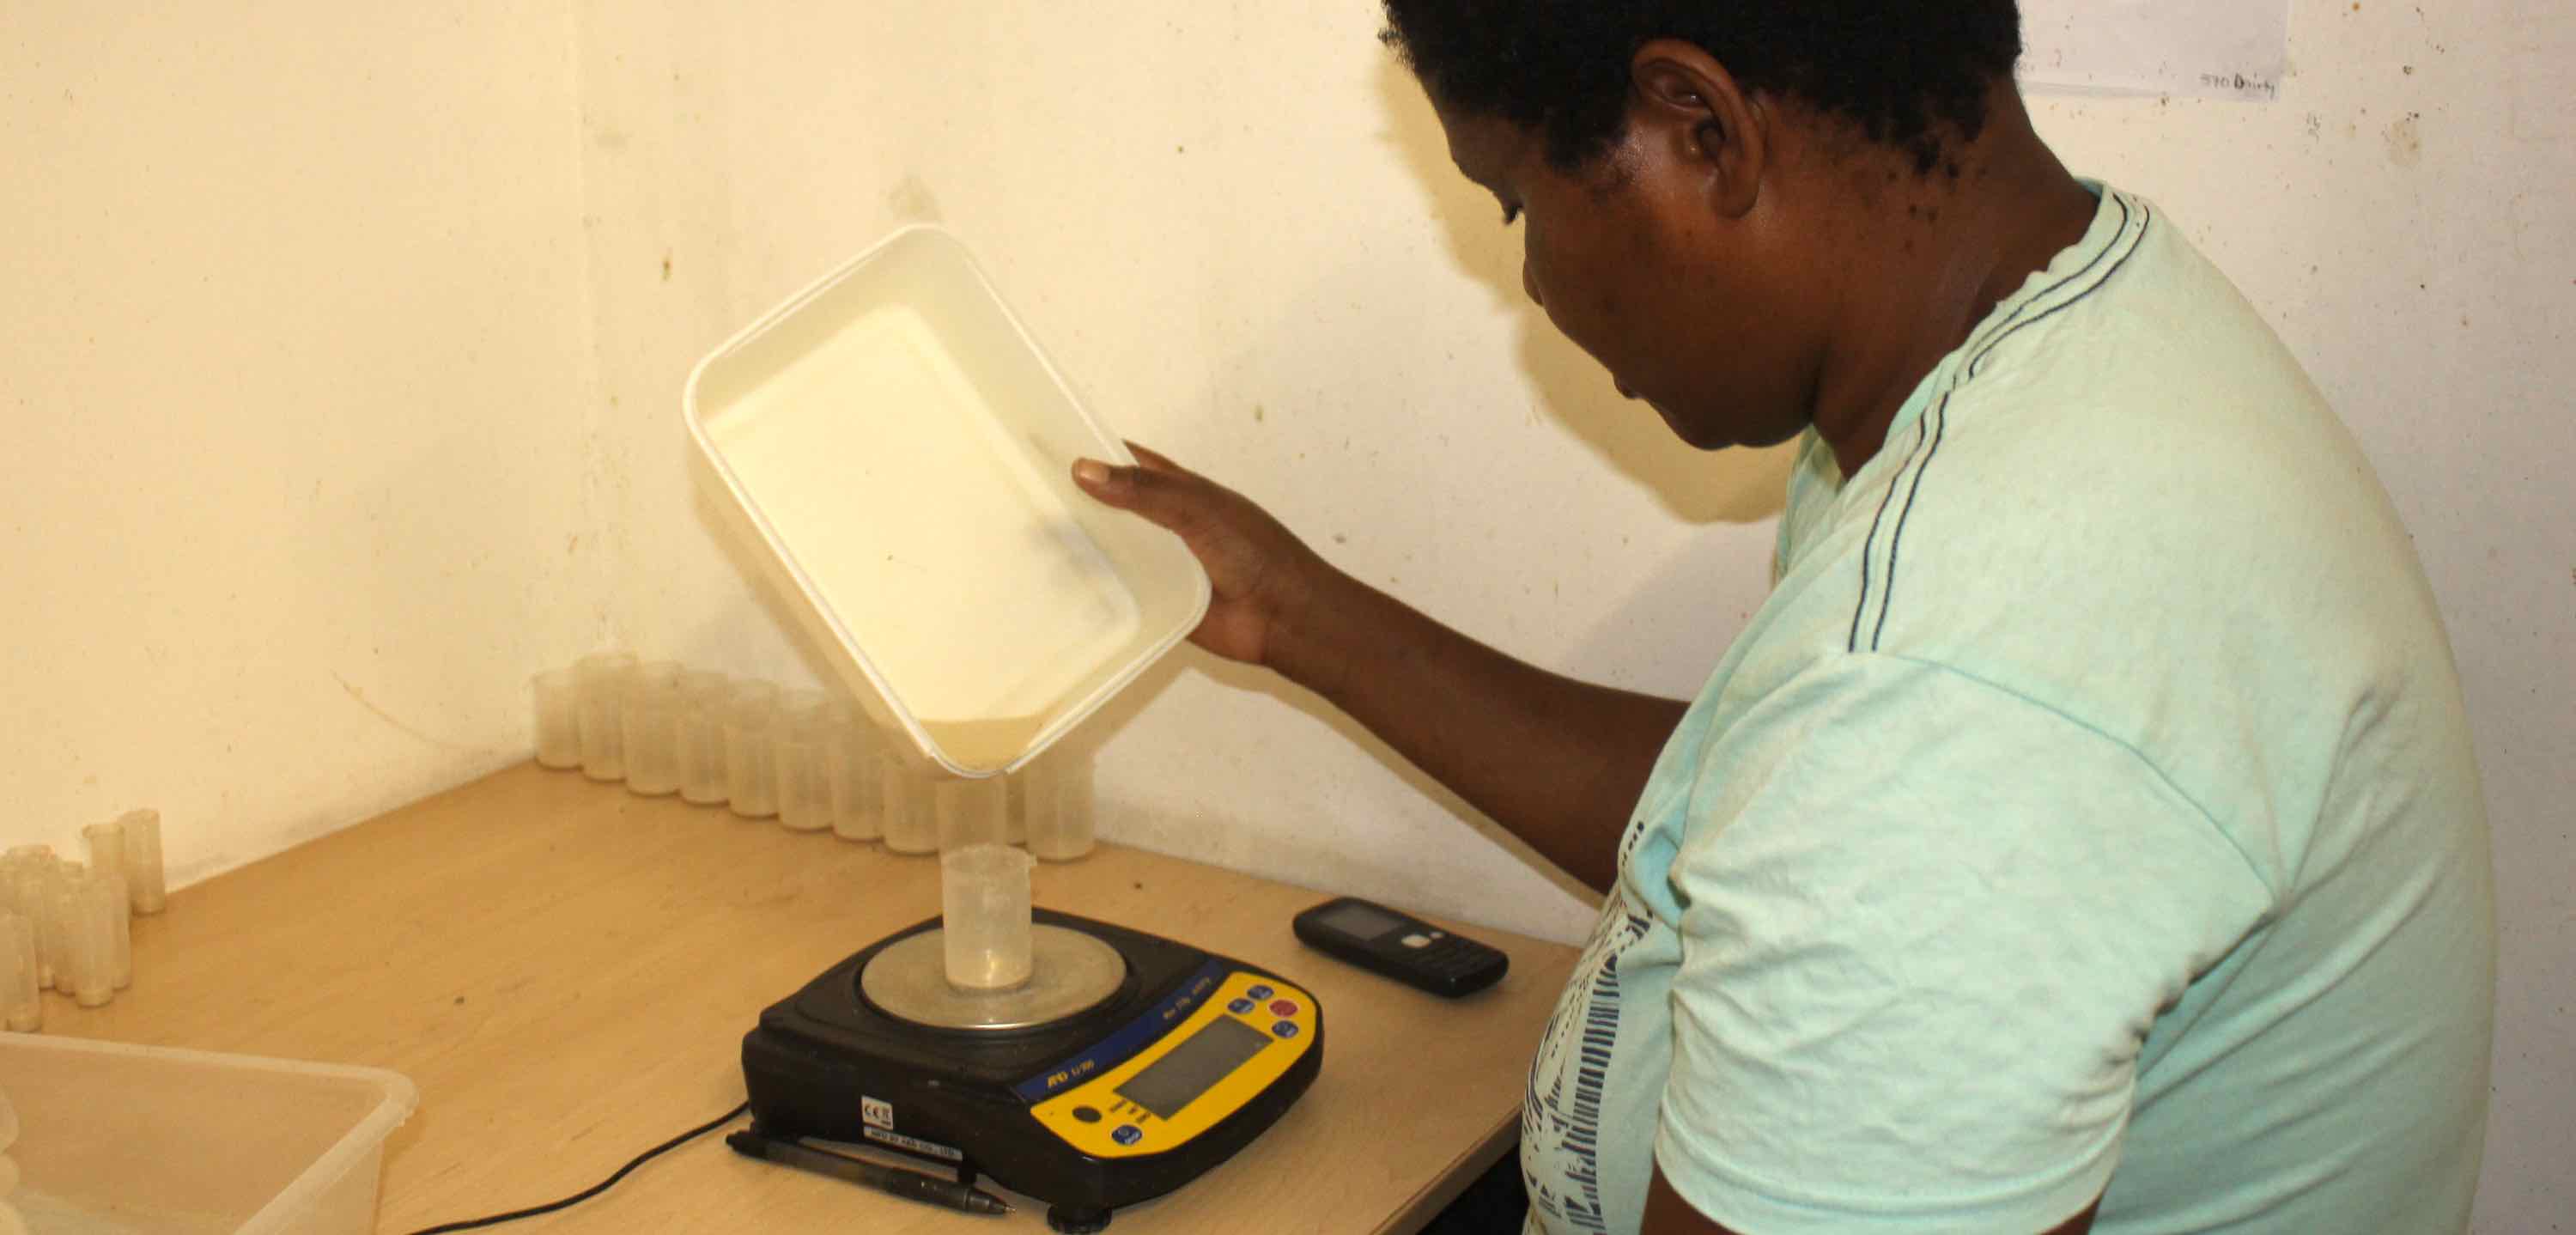 A woman carefully pours some larvae into a container on a digital scale.